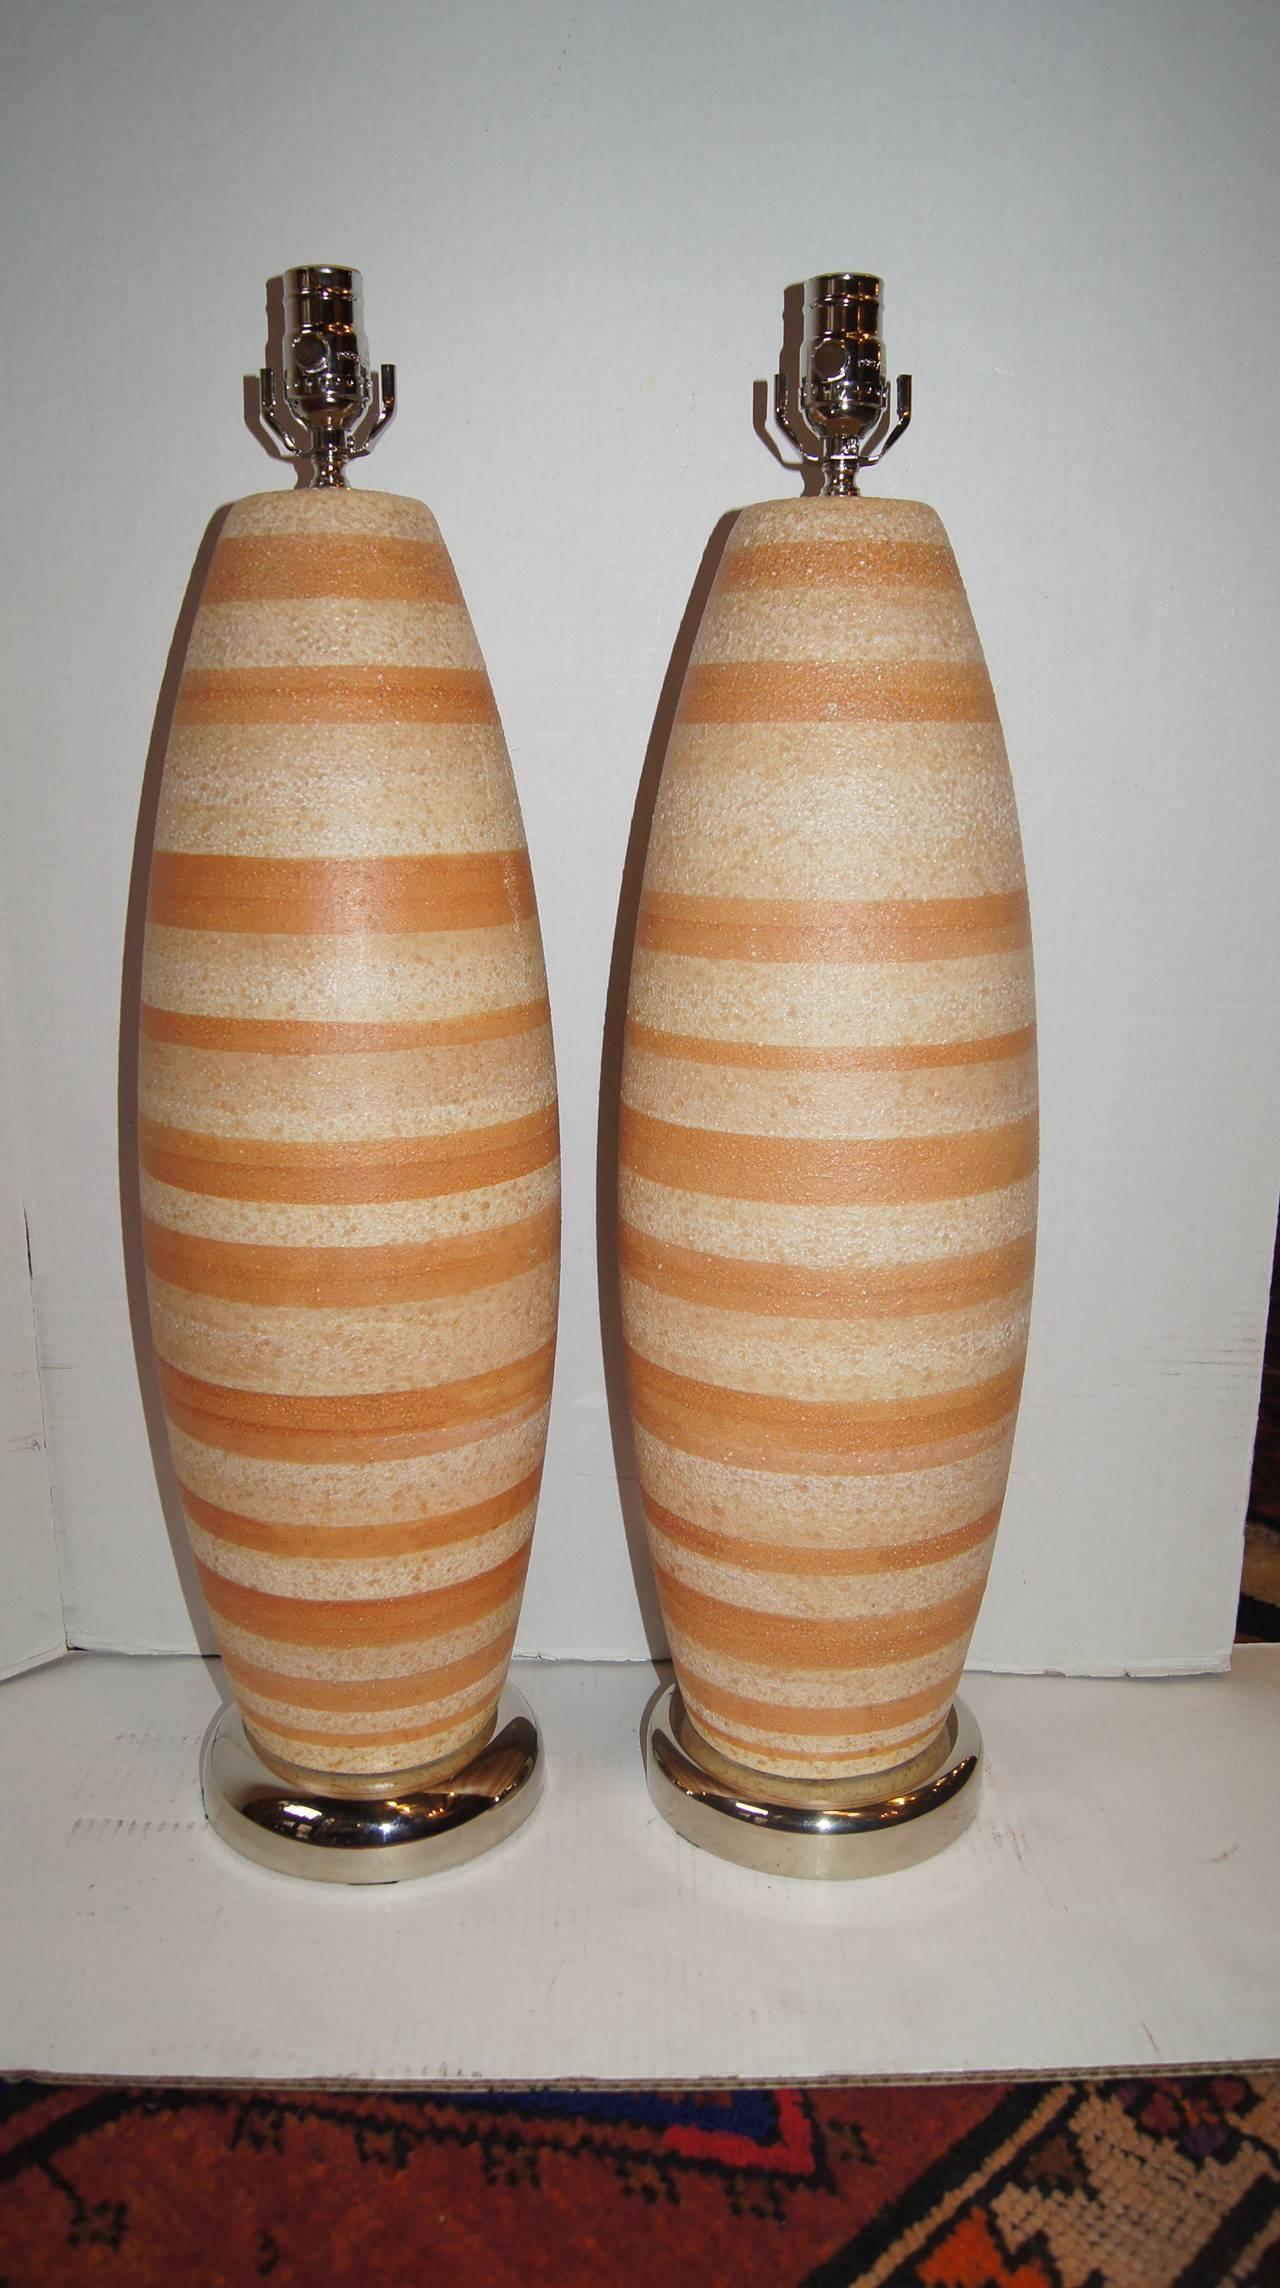 Pair of 1950s Italian ceramic lamps with two-toned striped body and nickel-plated bases.

Measurements:
Height of body: 23